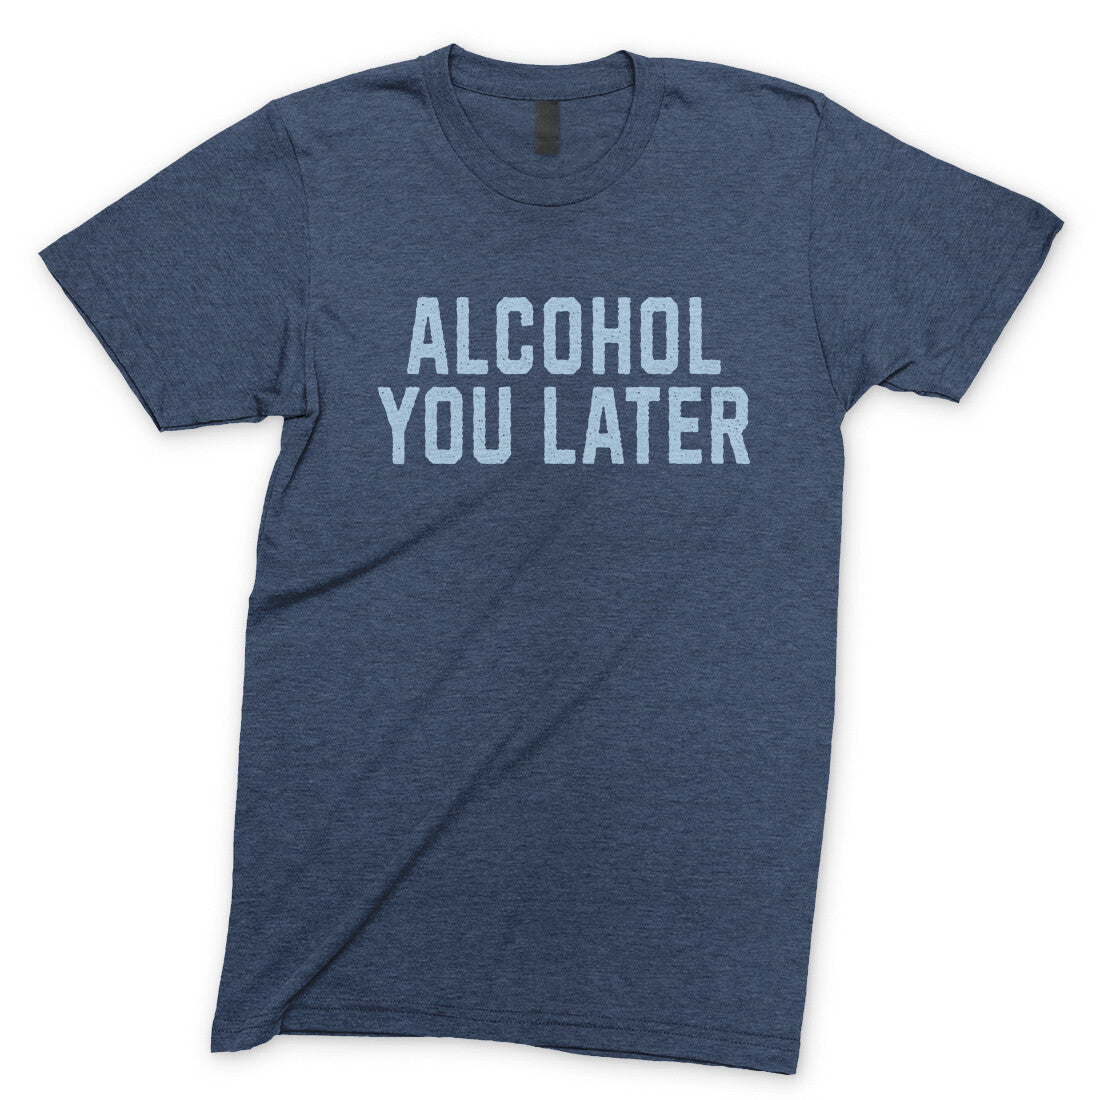 Alcohol You Later in Navy Heather Color